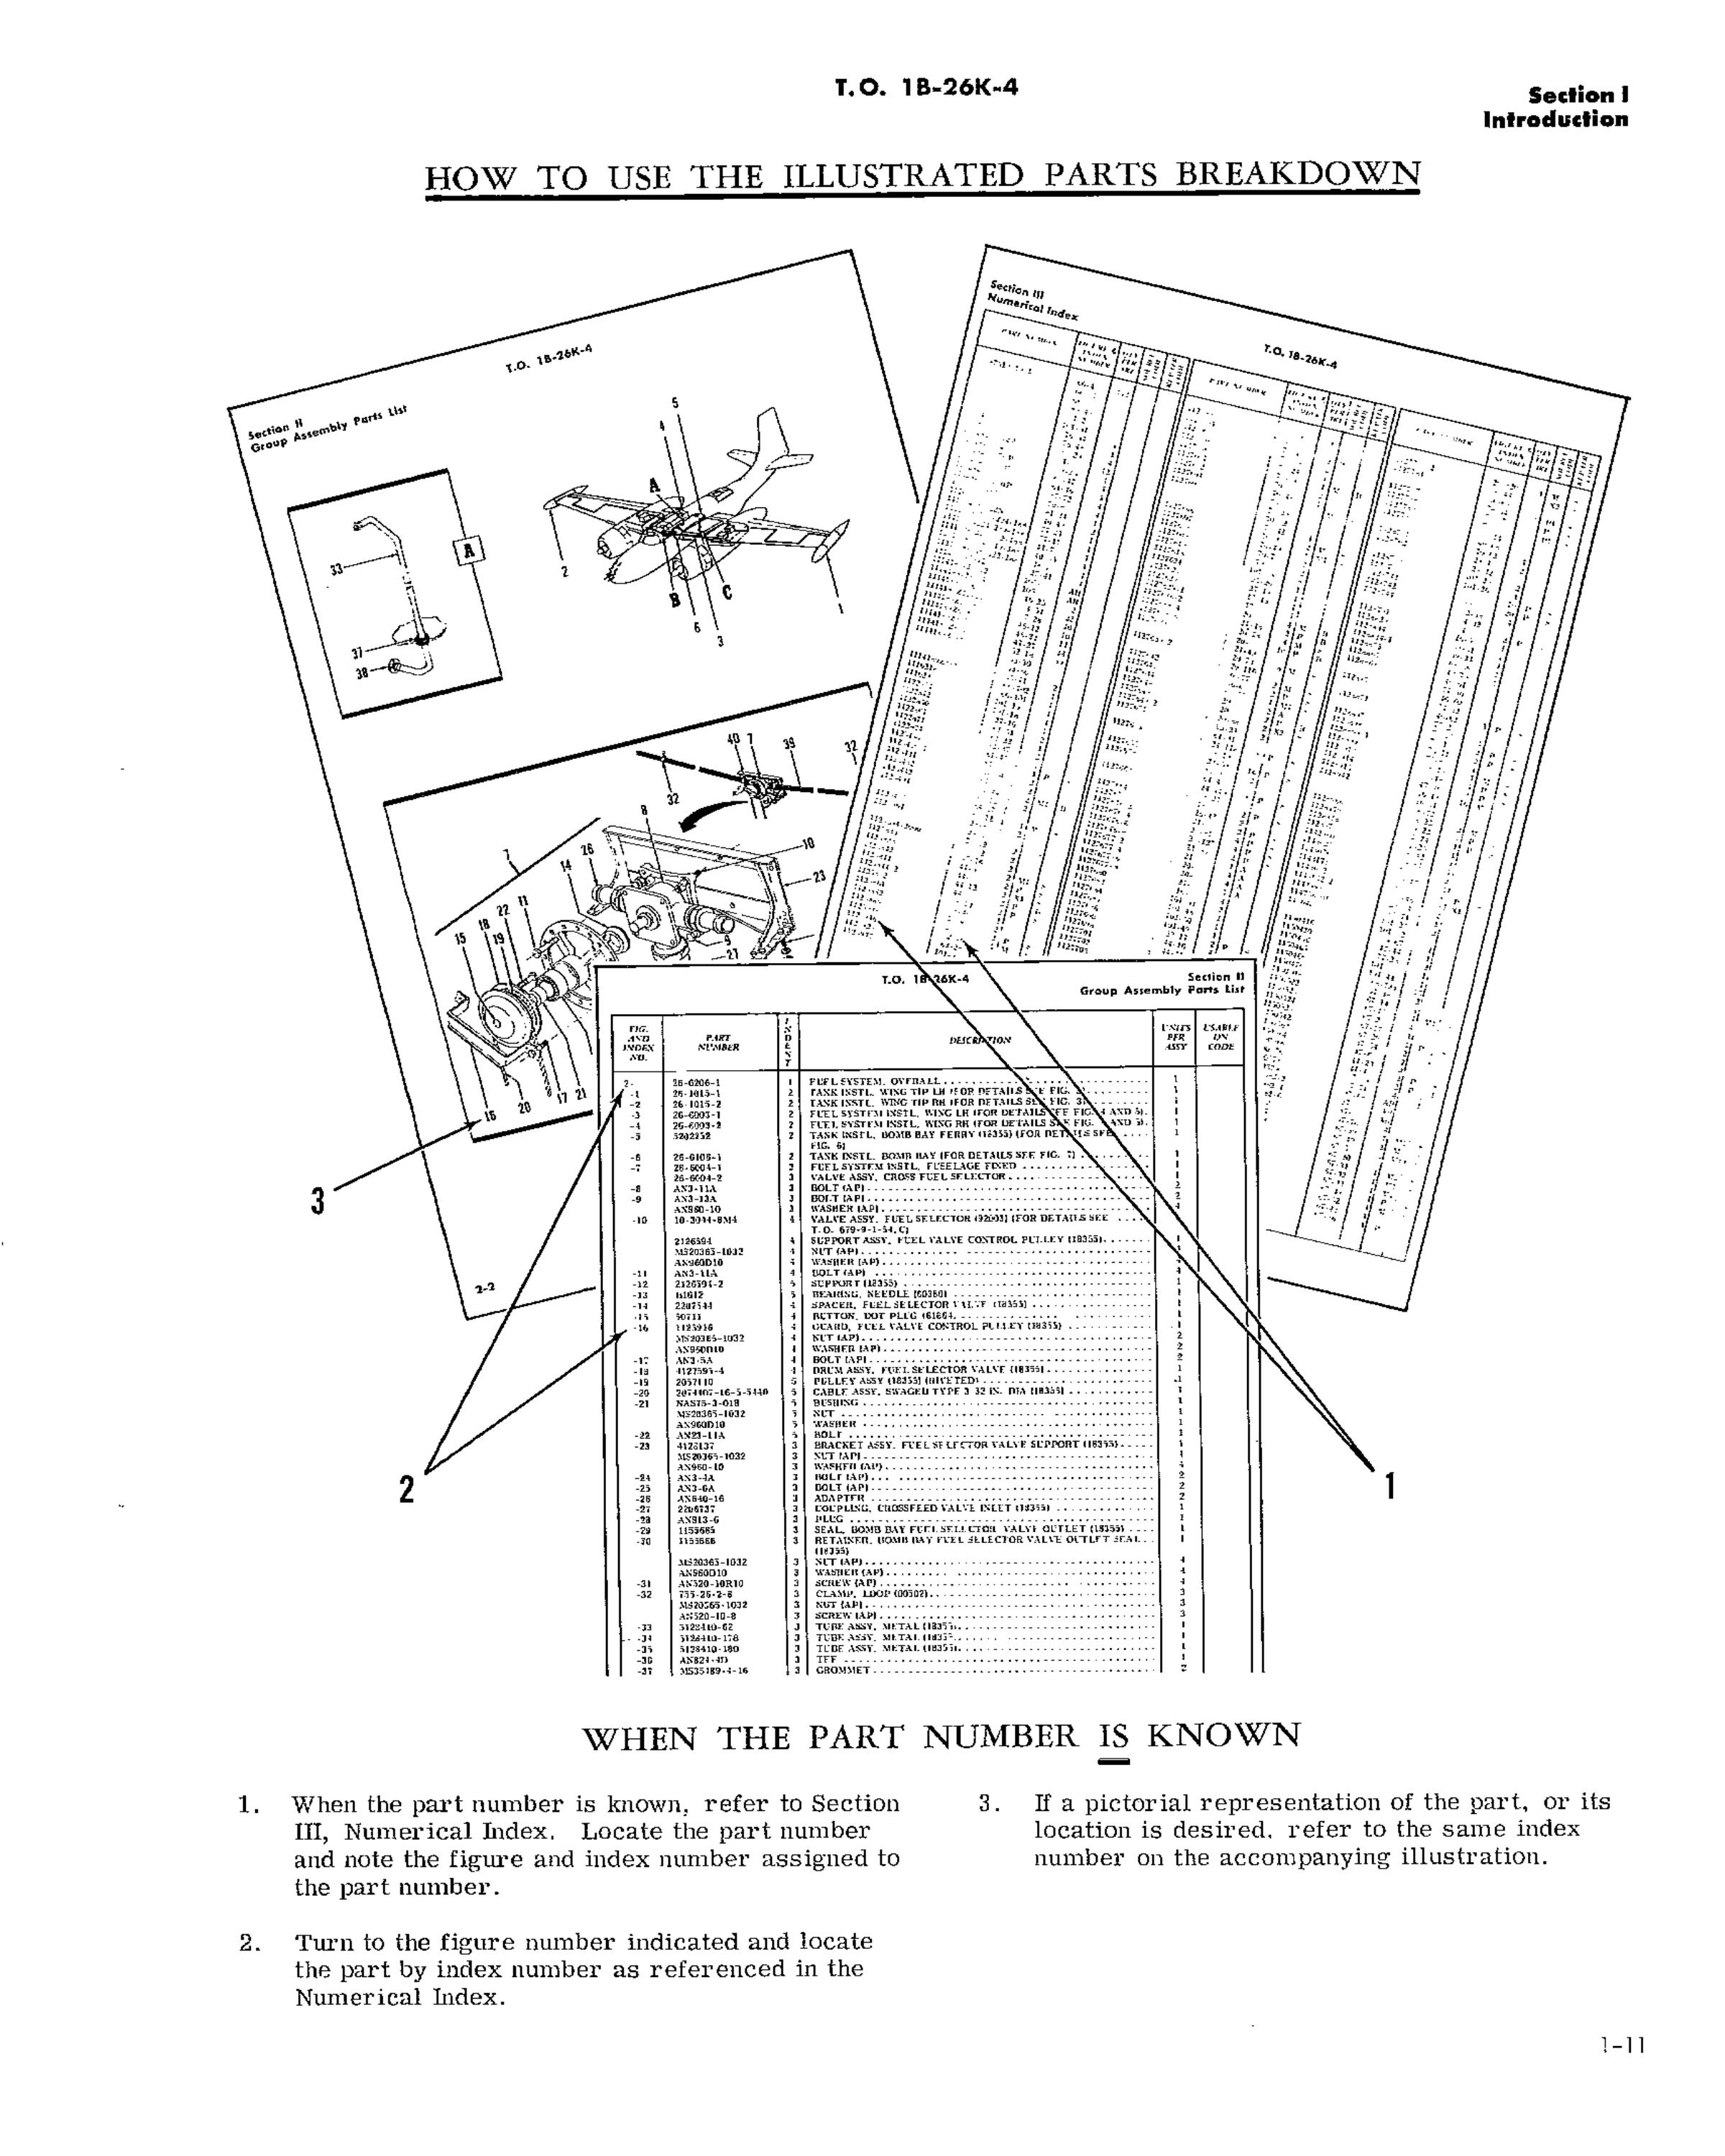 Sample page 17 from AirCorps Library document: Illustrated Parts Breakdown for B-26K Series Aircraft